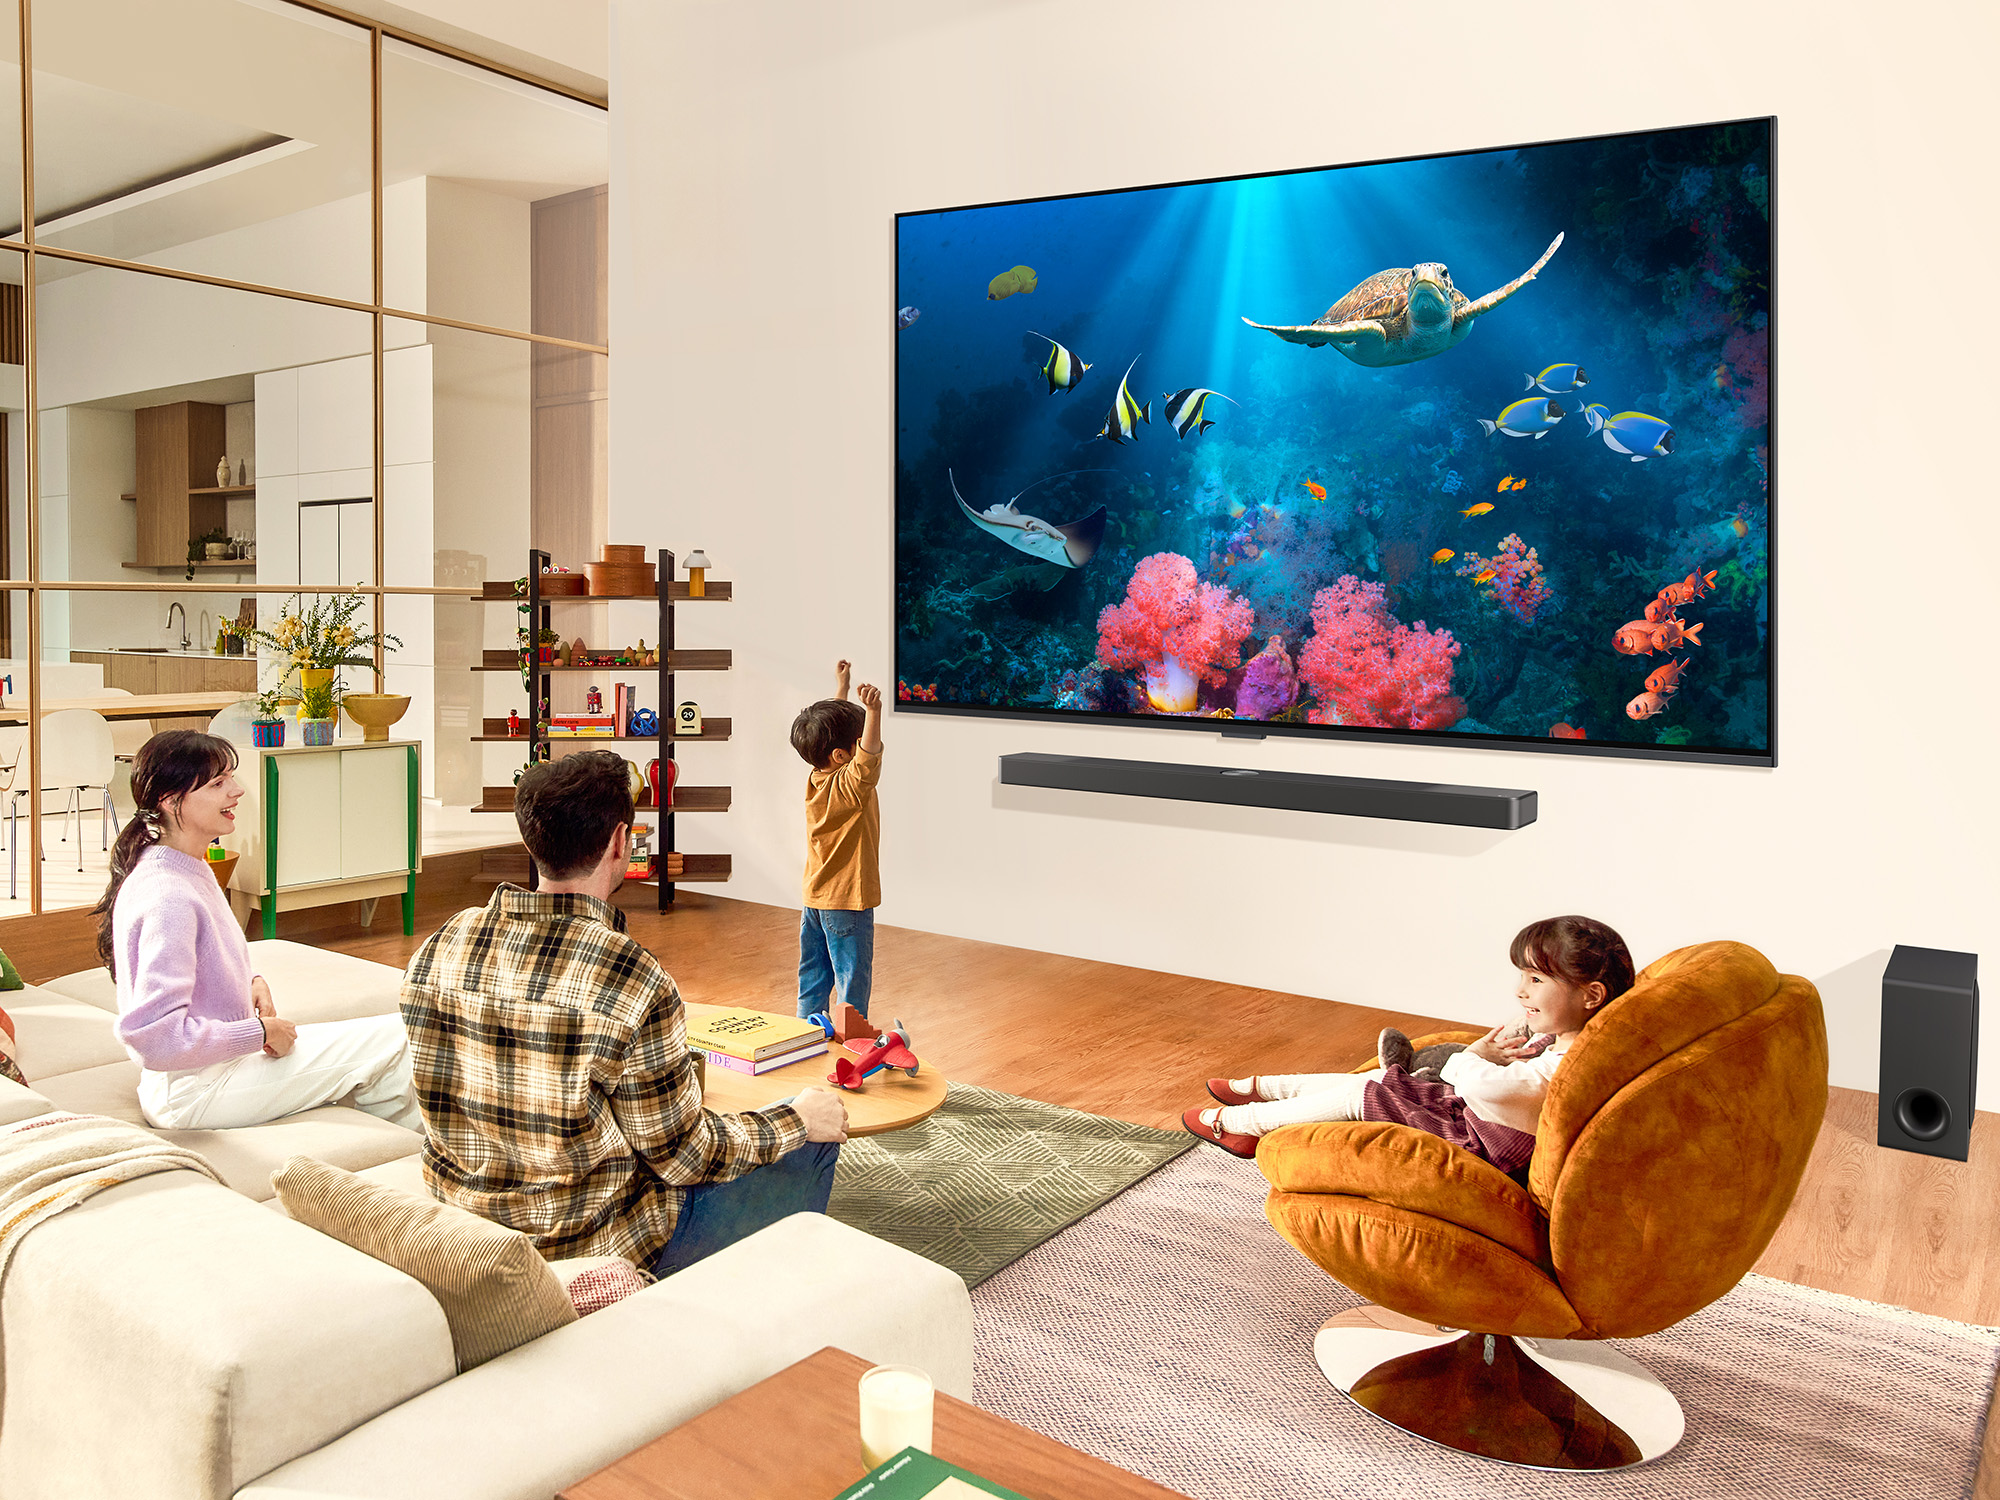 With Its QNED TV, LG Joins the Misleading Label Club